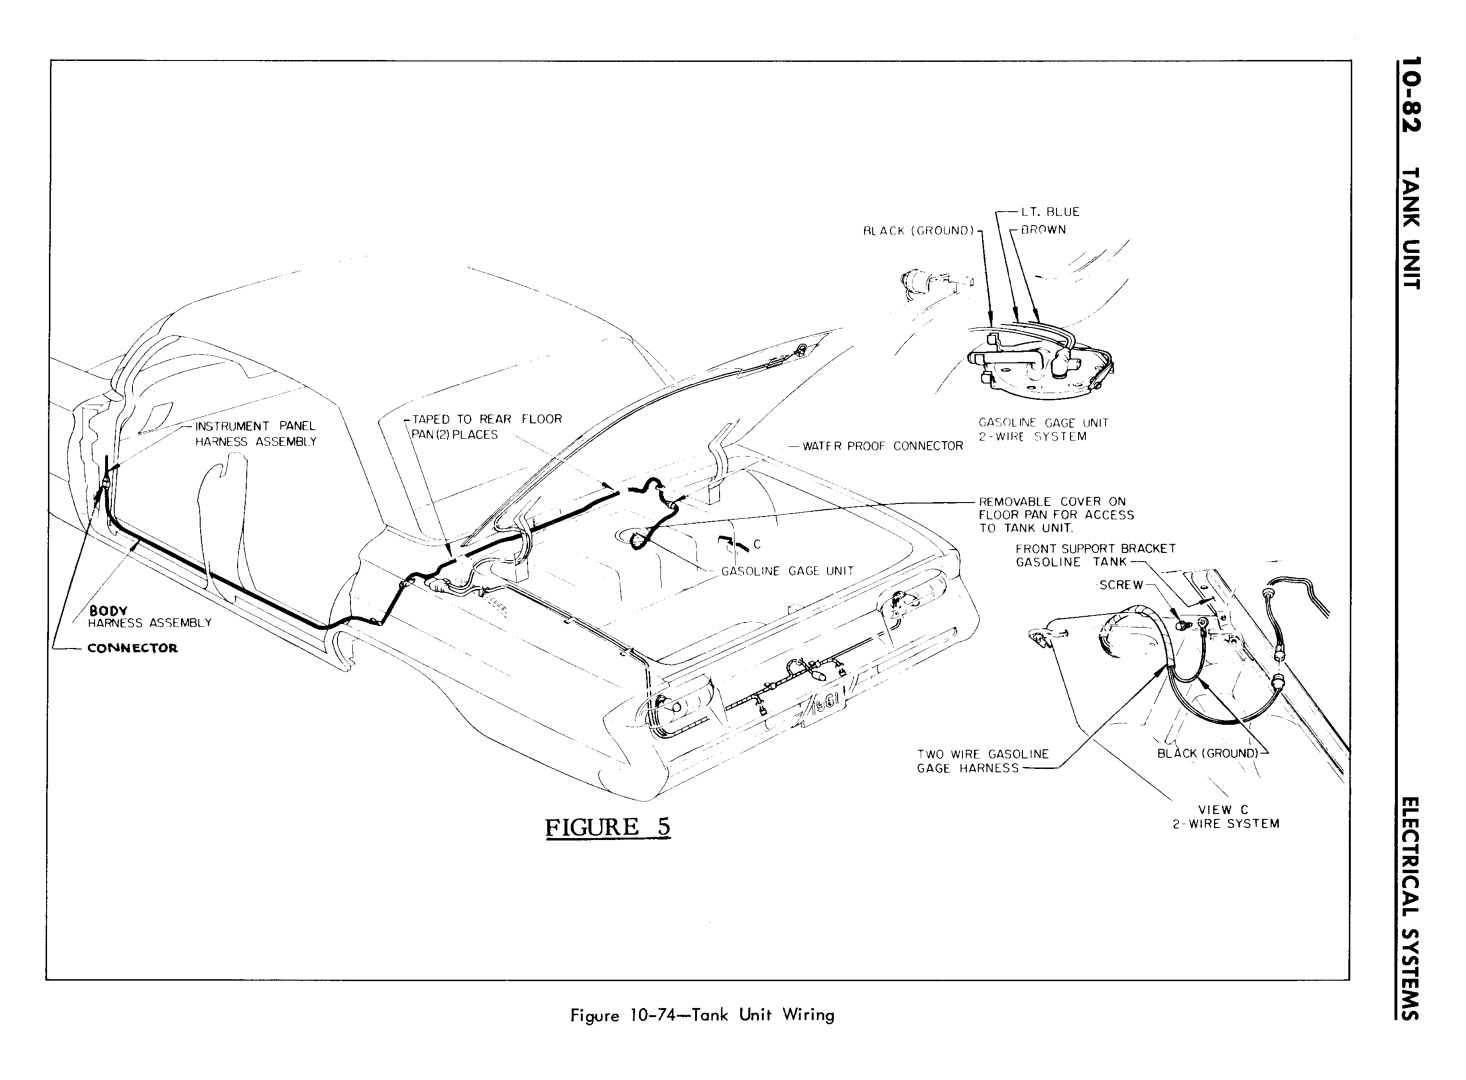 n_10 1961 Buick Shop Manual - Electrical Systems-082-082.jpg